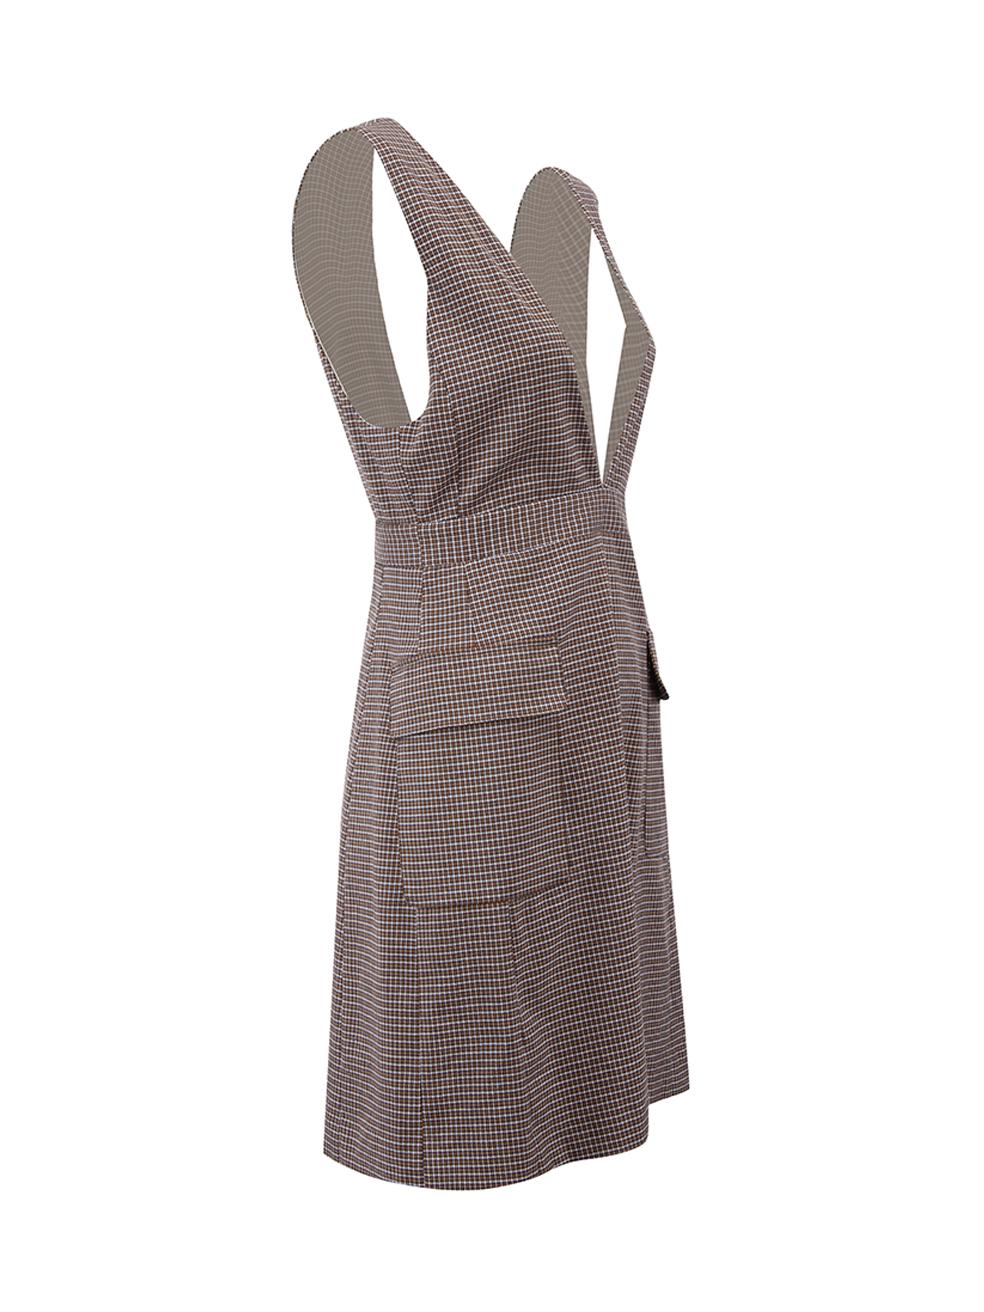 CONDITION is Very good. Minimal wear to dress is evident. Minimal wear to the left-side of the dress lining with a pull to the weave on this used See by Chloé designer resale item.

Details


Brown

Polyester

Pinafore dress

Houndstooth